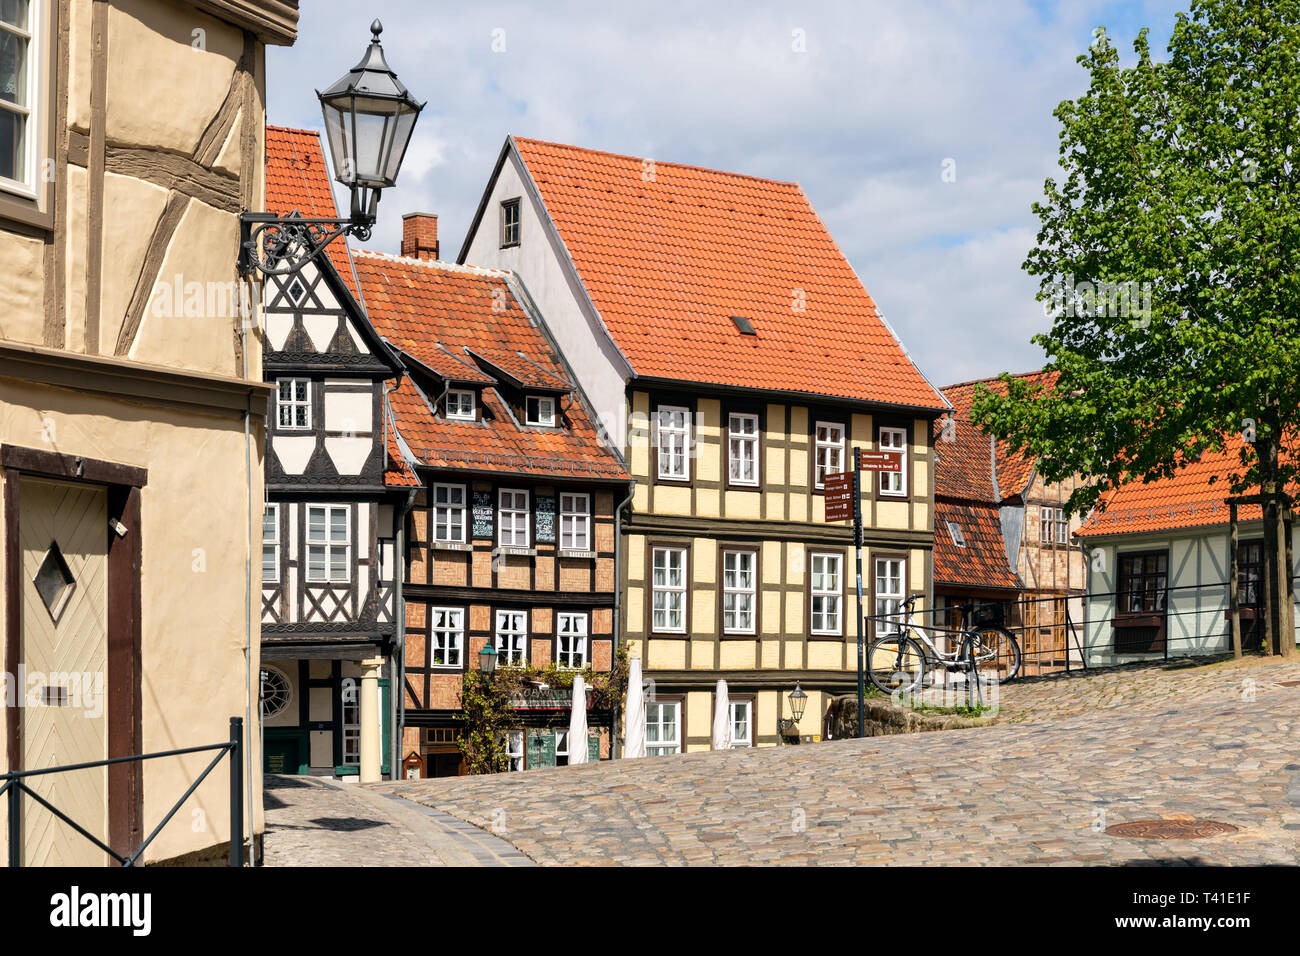 QUEDLINBURG, GERMANY - APR 26, 2018: Historic timber frame houses in the medieval town Quedlinburg, North of the Harz mountains. Saxony-Anhalt, German Stock Photo